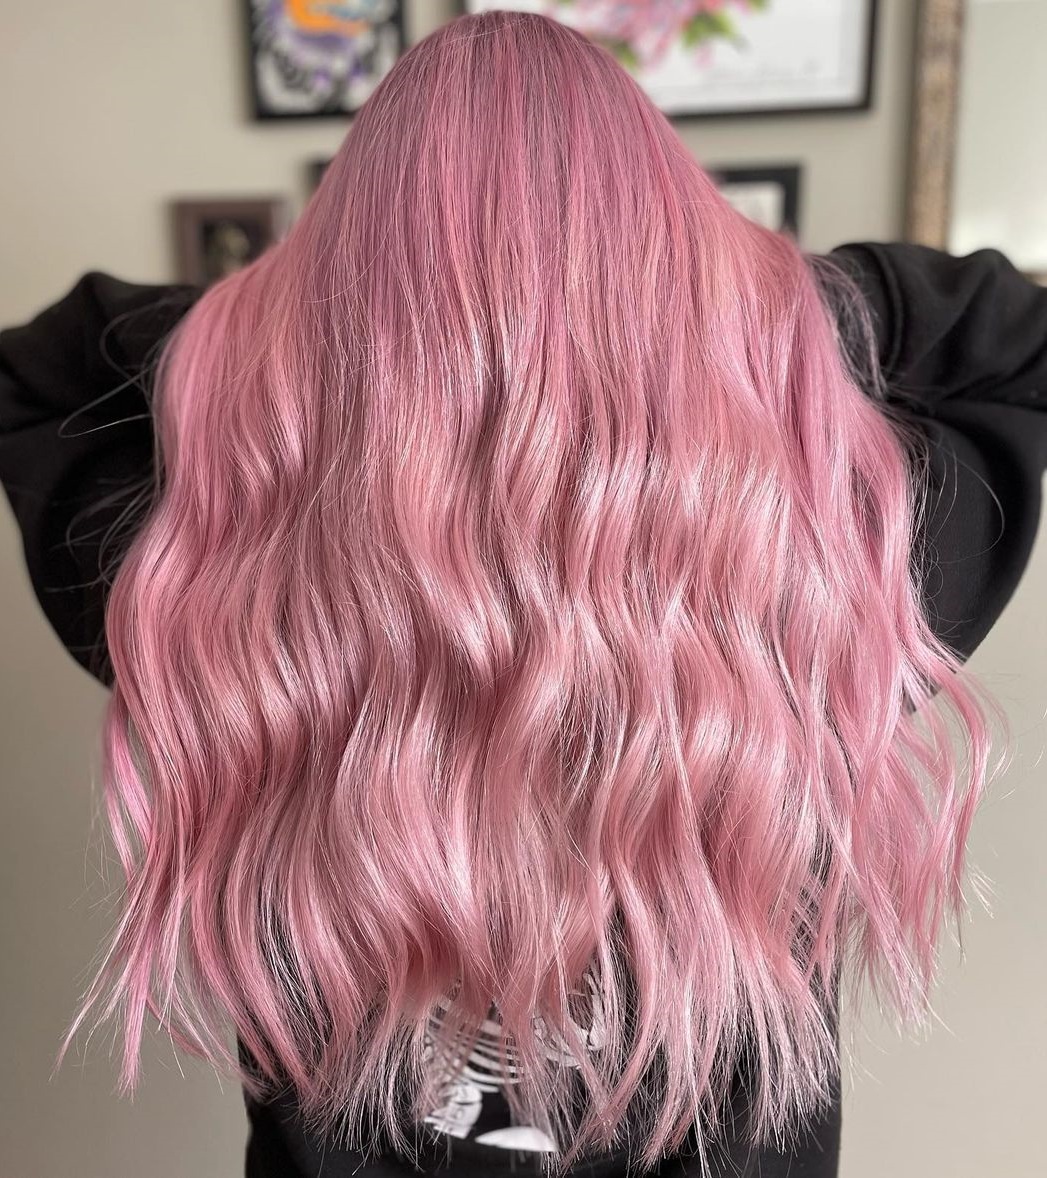 55 Lovely Pink Hair Colors to Fall in Love with